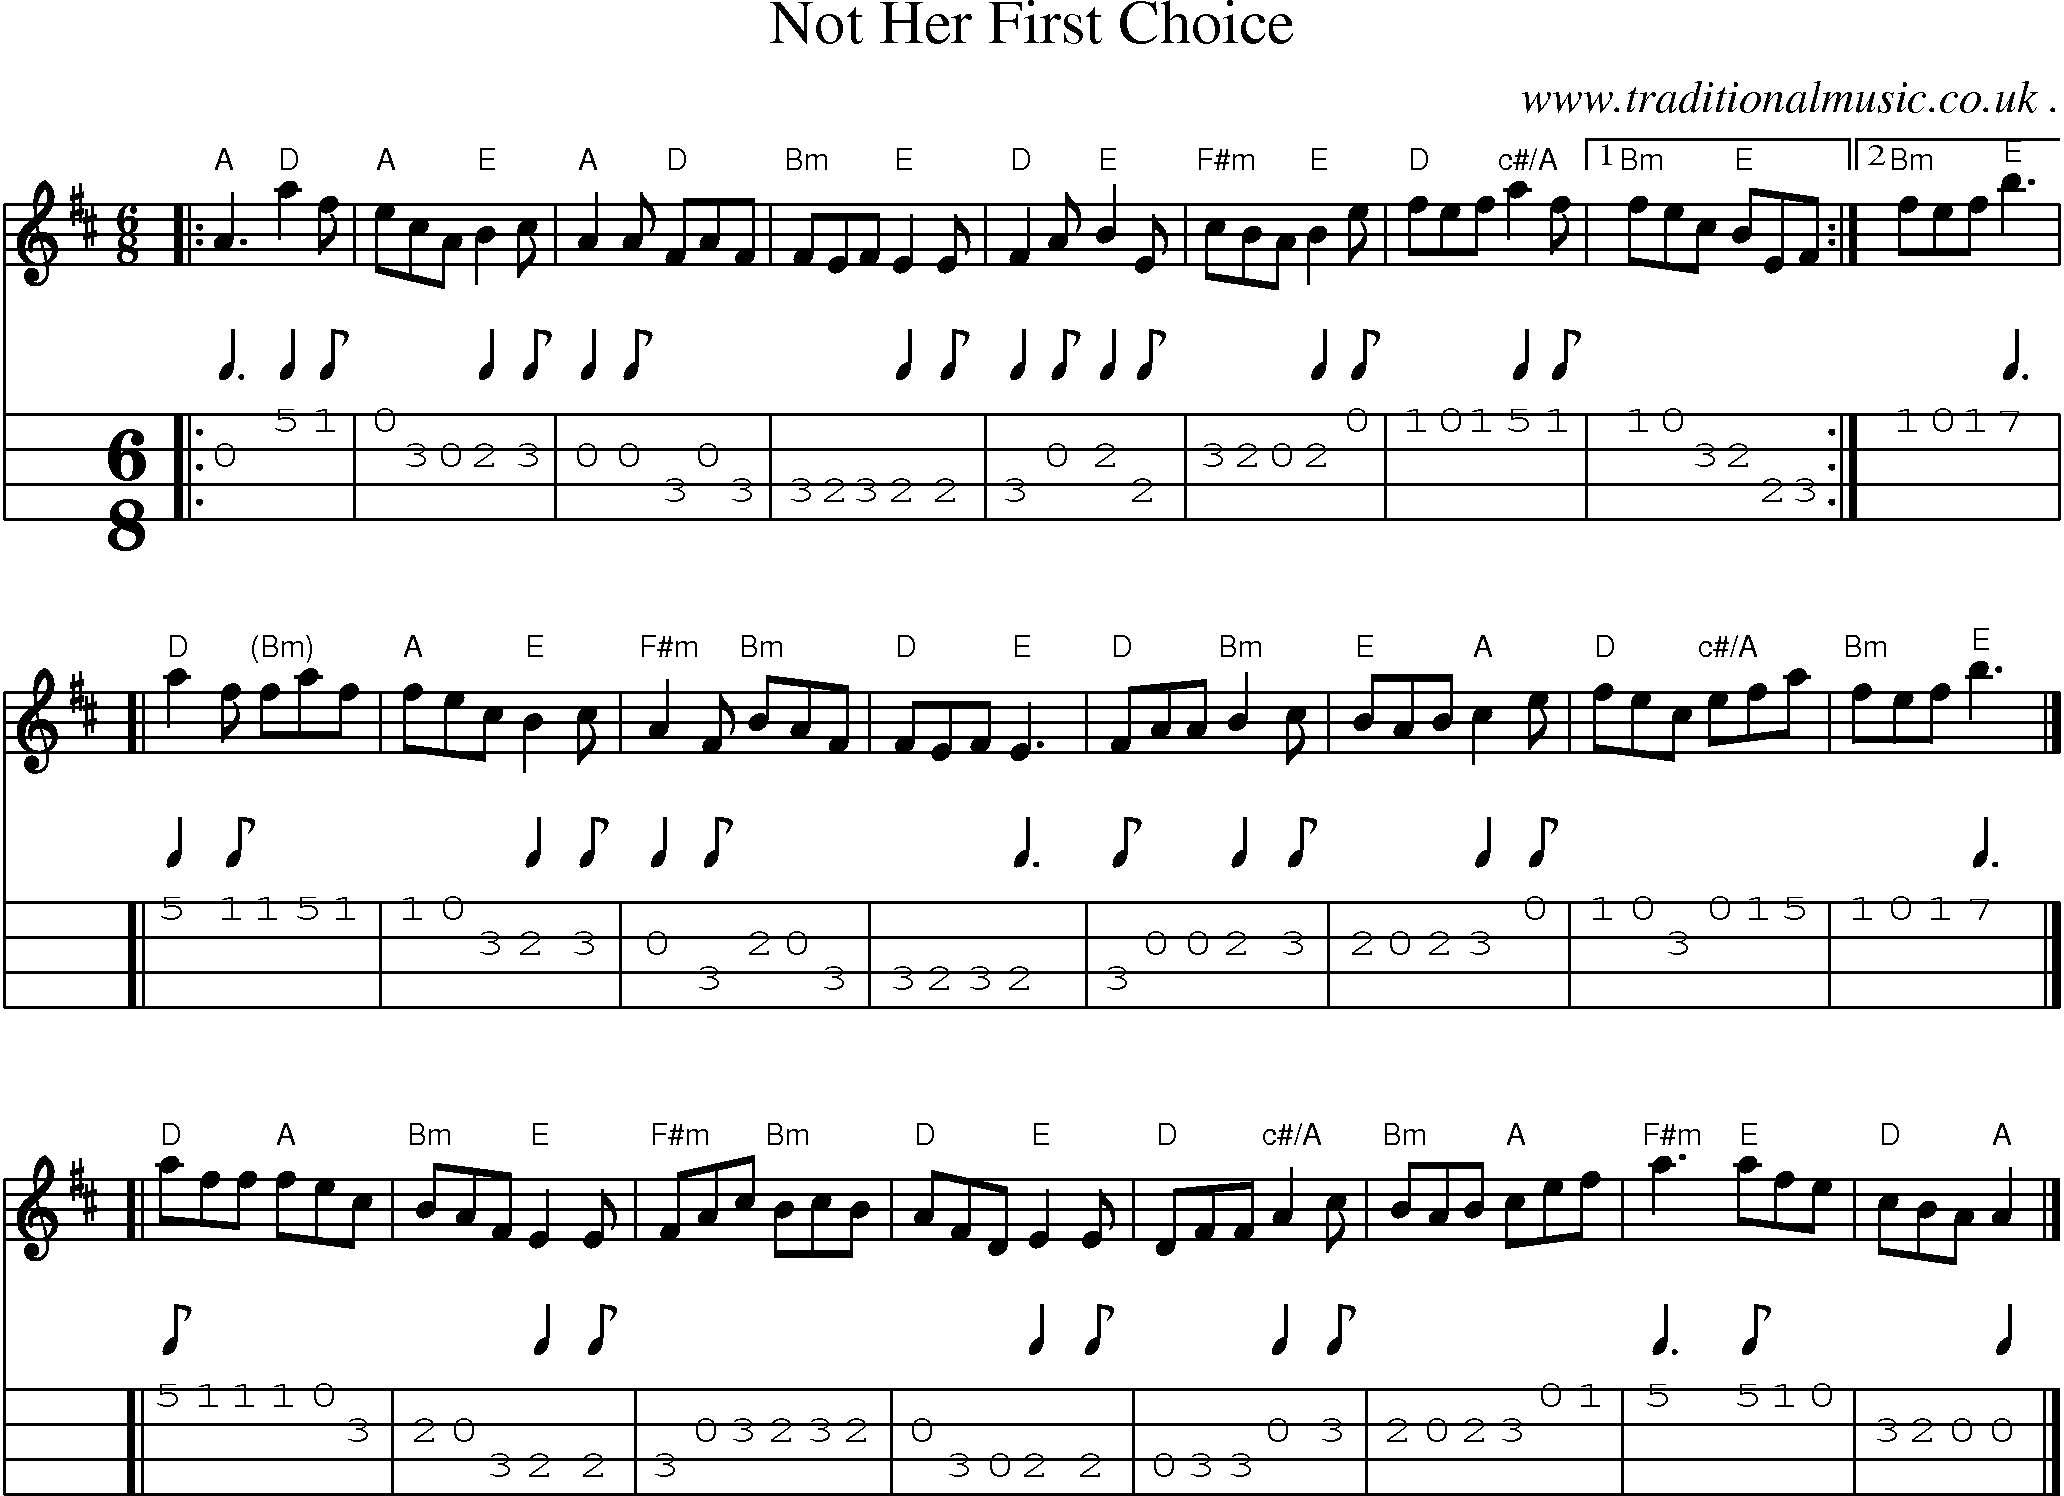 Sheet-music  score, Chords and Mandolin Tabs for Not Her First Choice